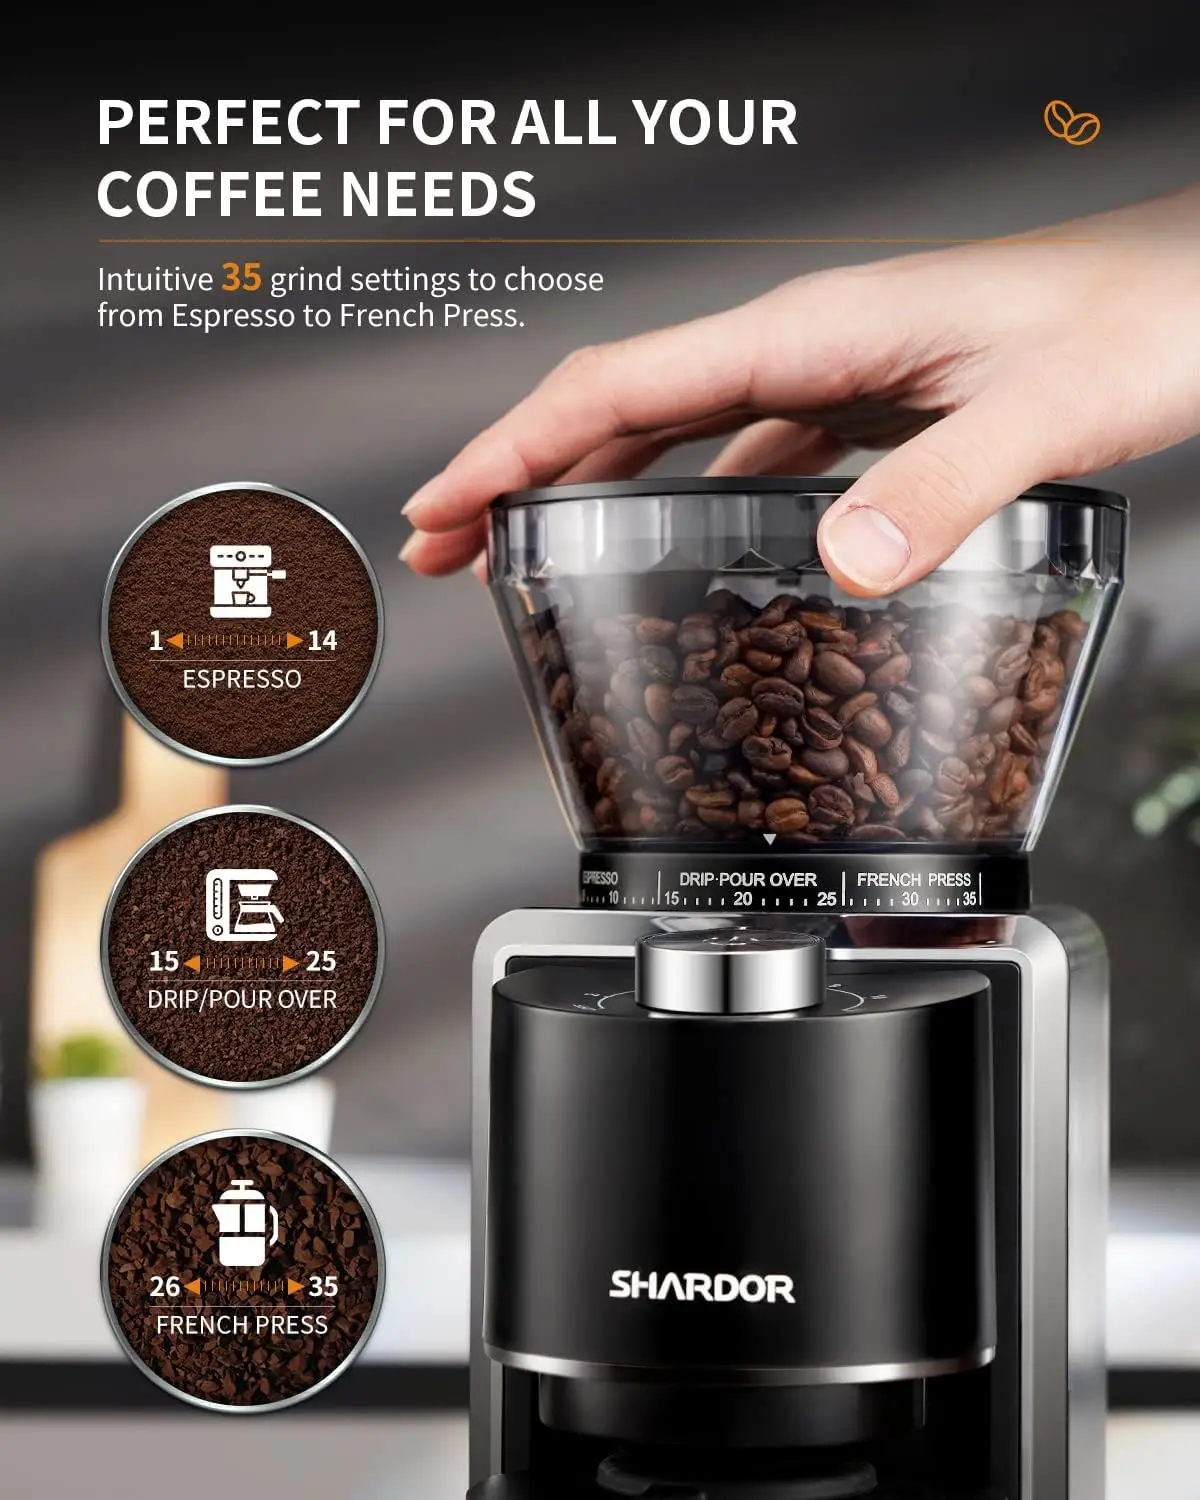 https://ae01.alicdn.com/kf/S4f076a182069419ebc15a8dd7bd36d3cl/Burr-Coffee-Grinder-Electric-Adjustable-Burr-Mill-with-35-Precise-Grind-Setting-for-2-12-Cup.jpg